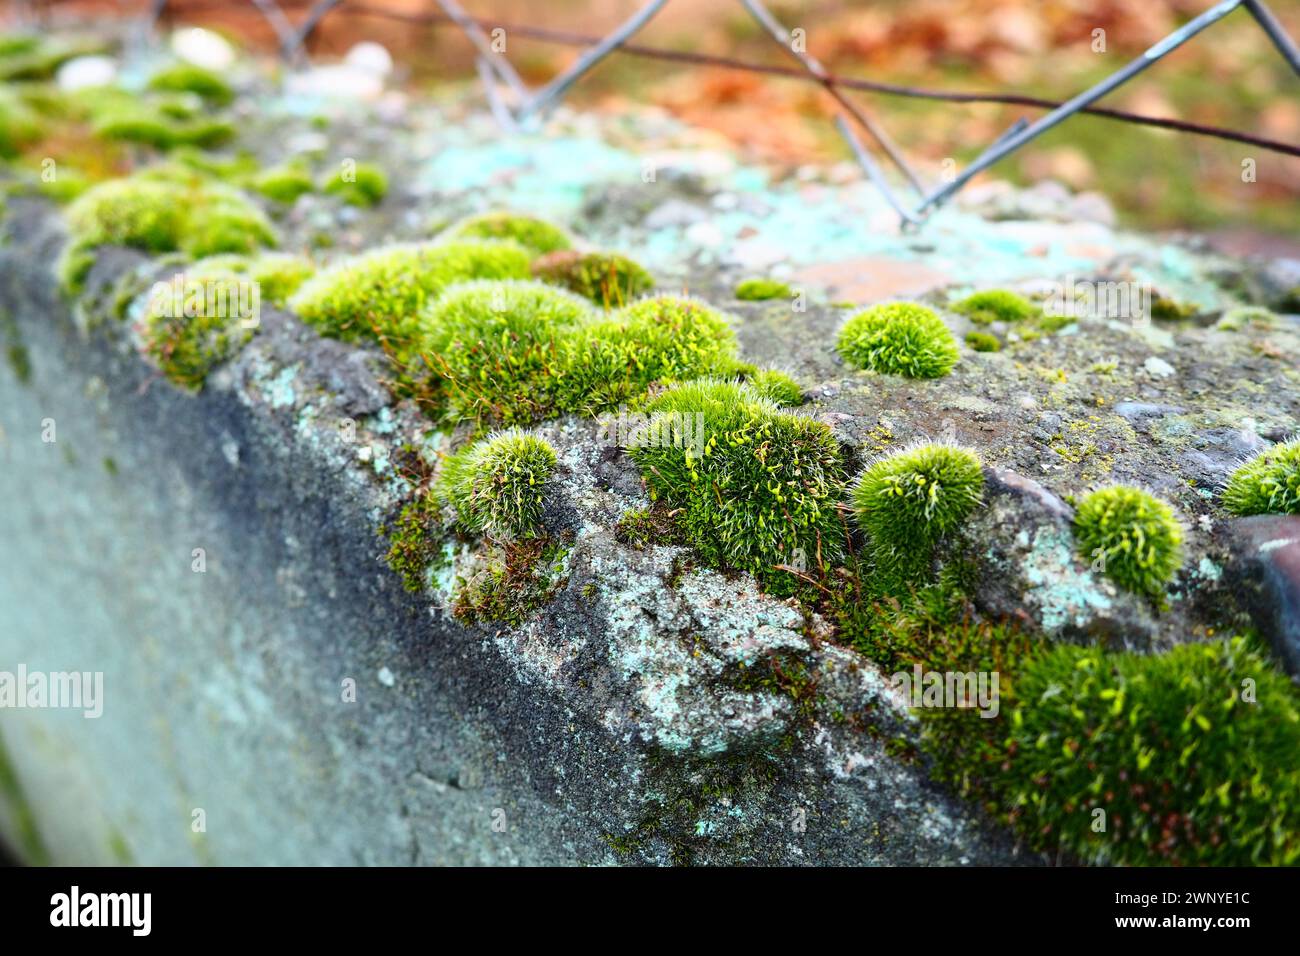 Mossy higher plants or bryophytes. The theme of bryology, the science of mosses. Damp concrete covered with a bright green moss carpet. Beautiful Stock Photo